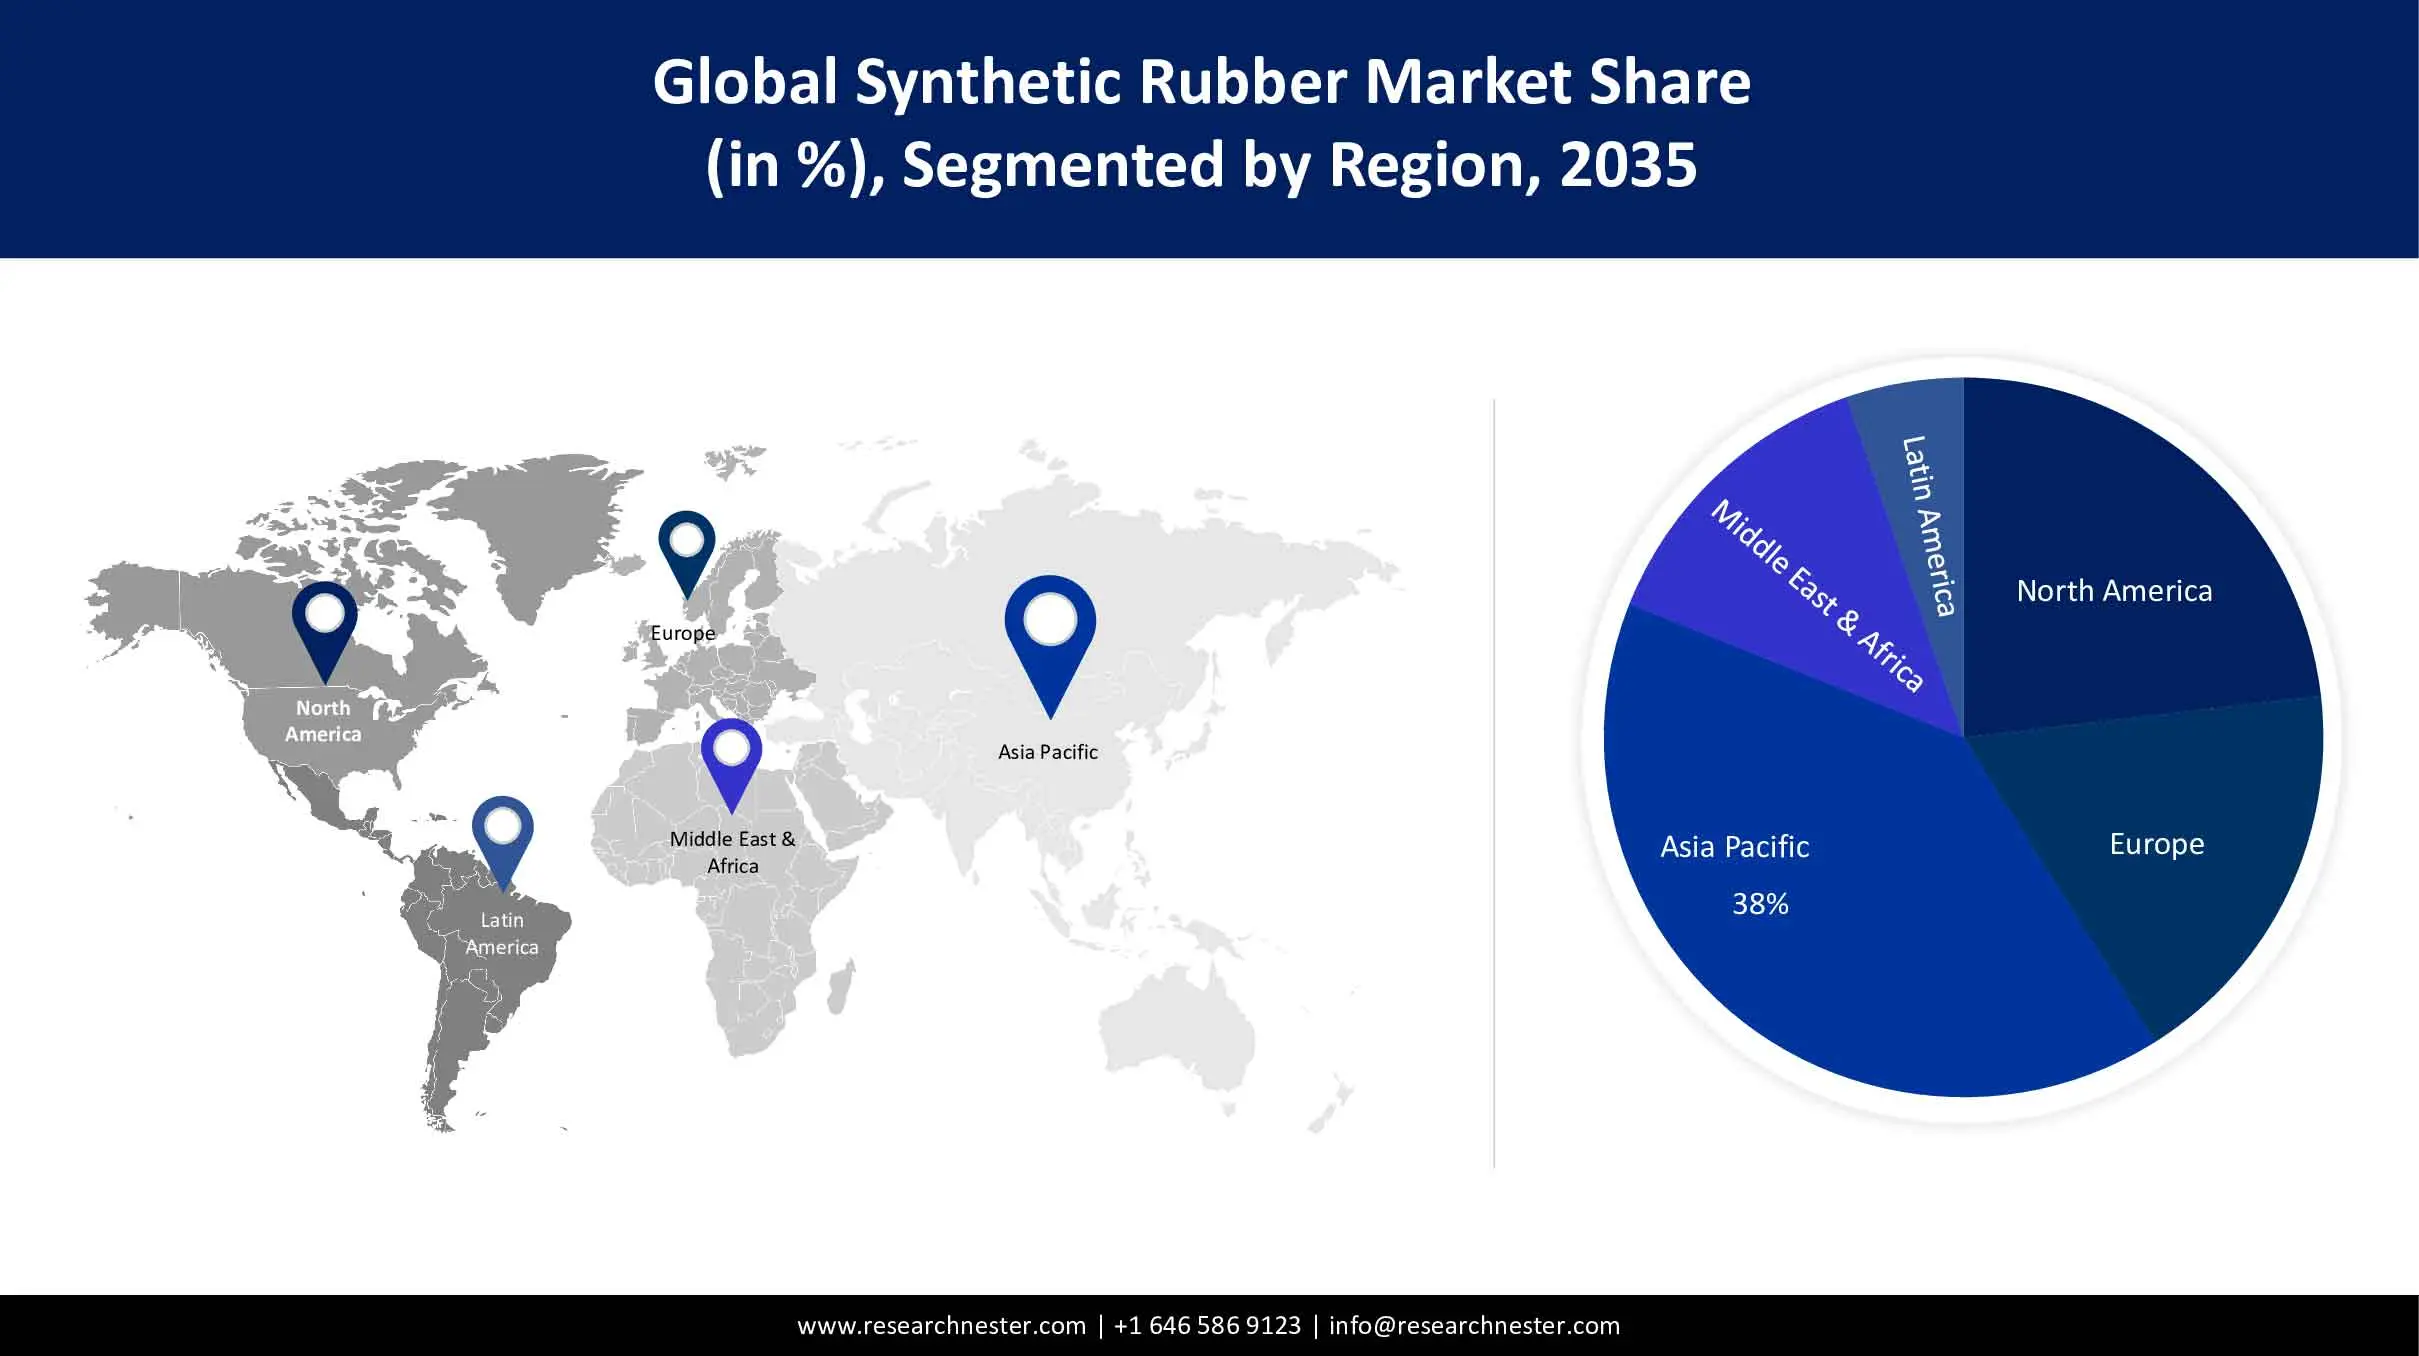 Synthetic Rubber Market Size